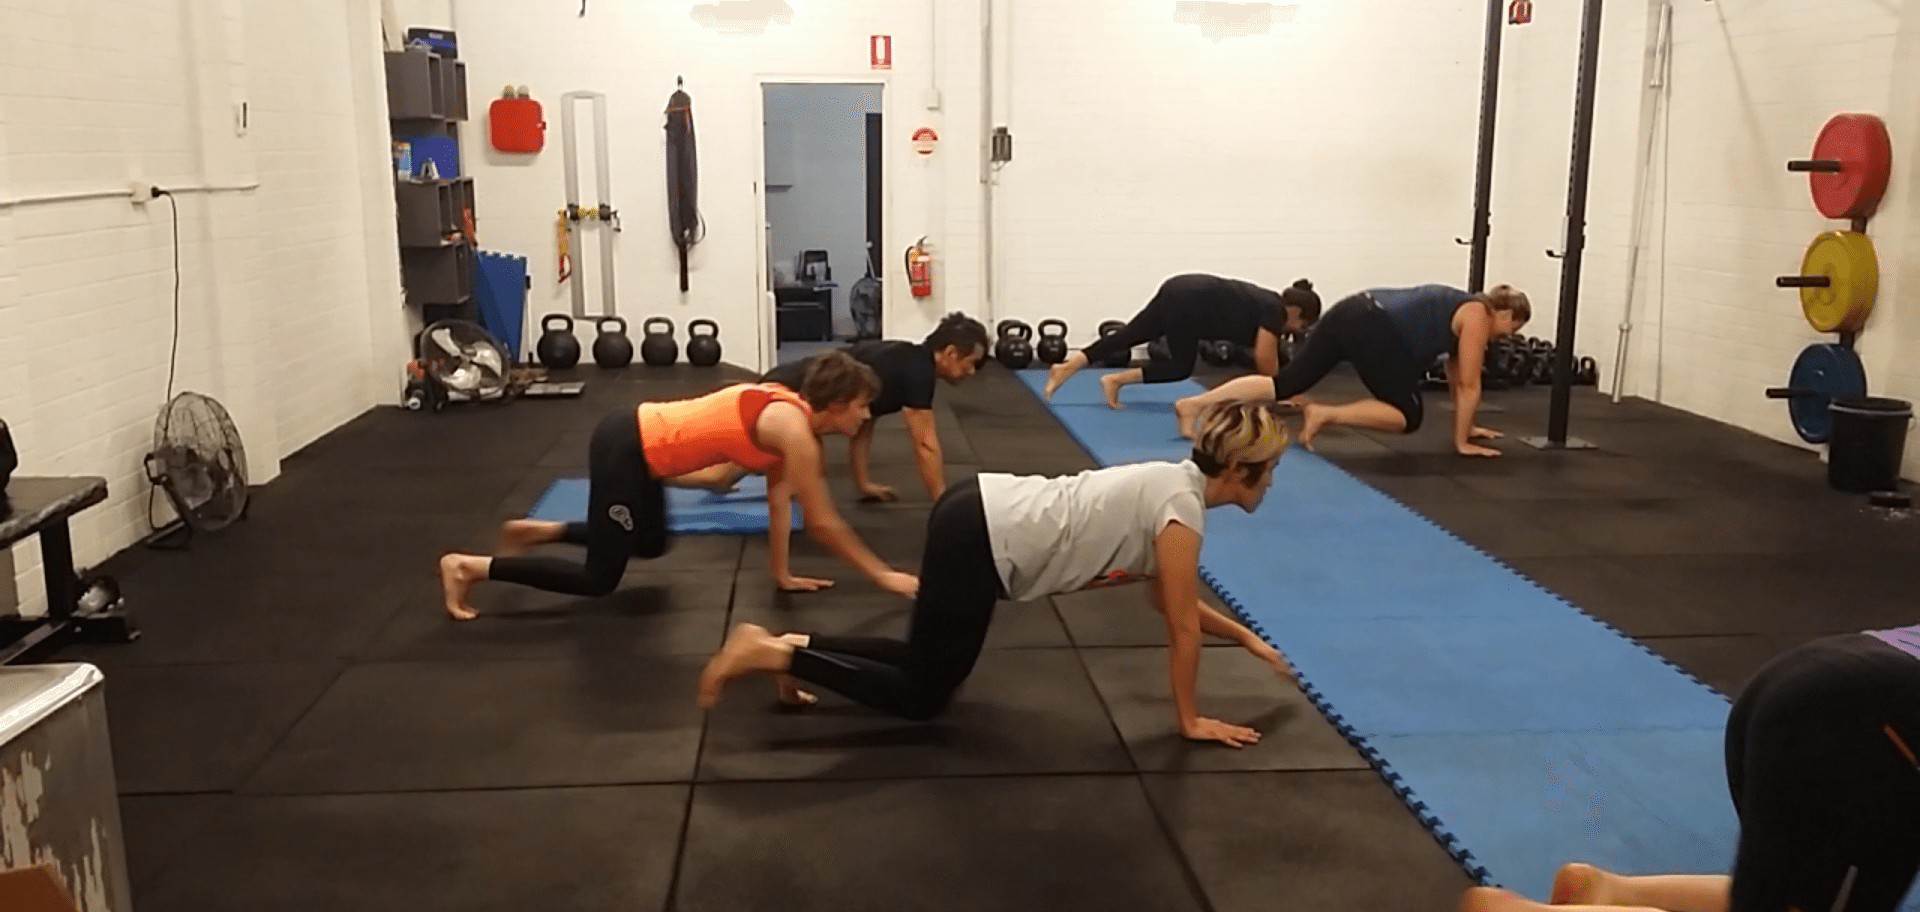 Why Crawling Makes You Stronger